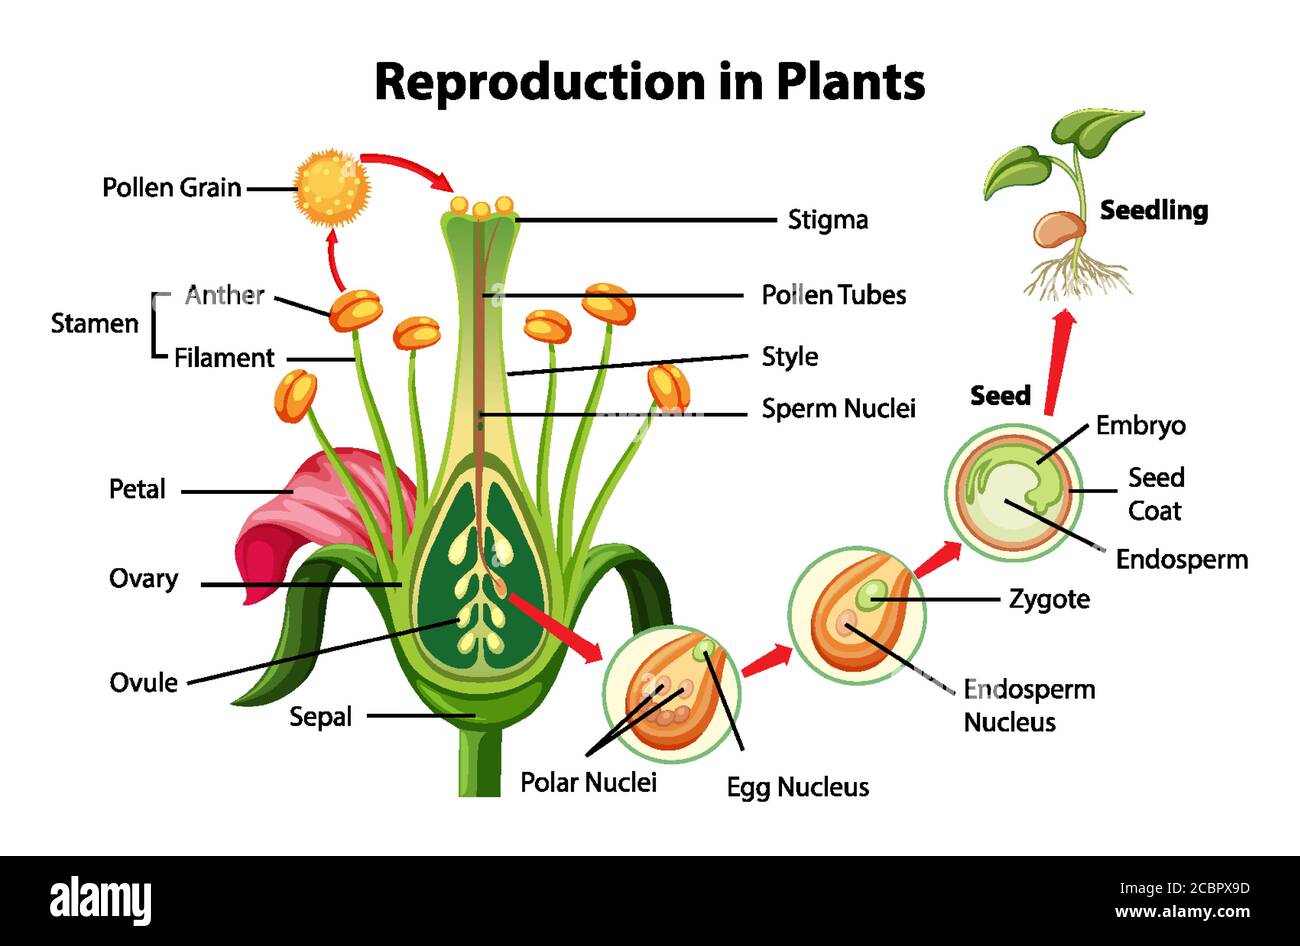 Reproduction in plants diagram illustration Stock Vector